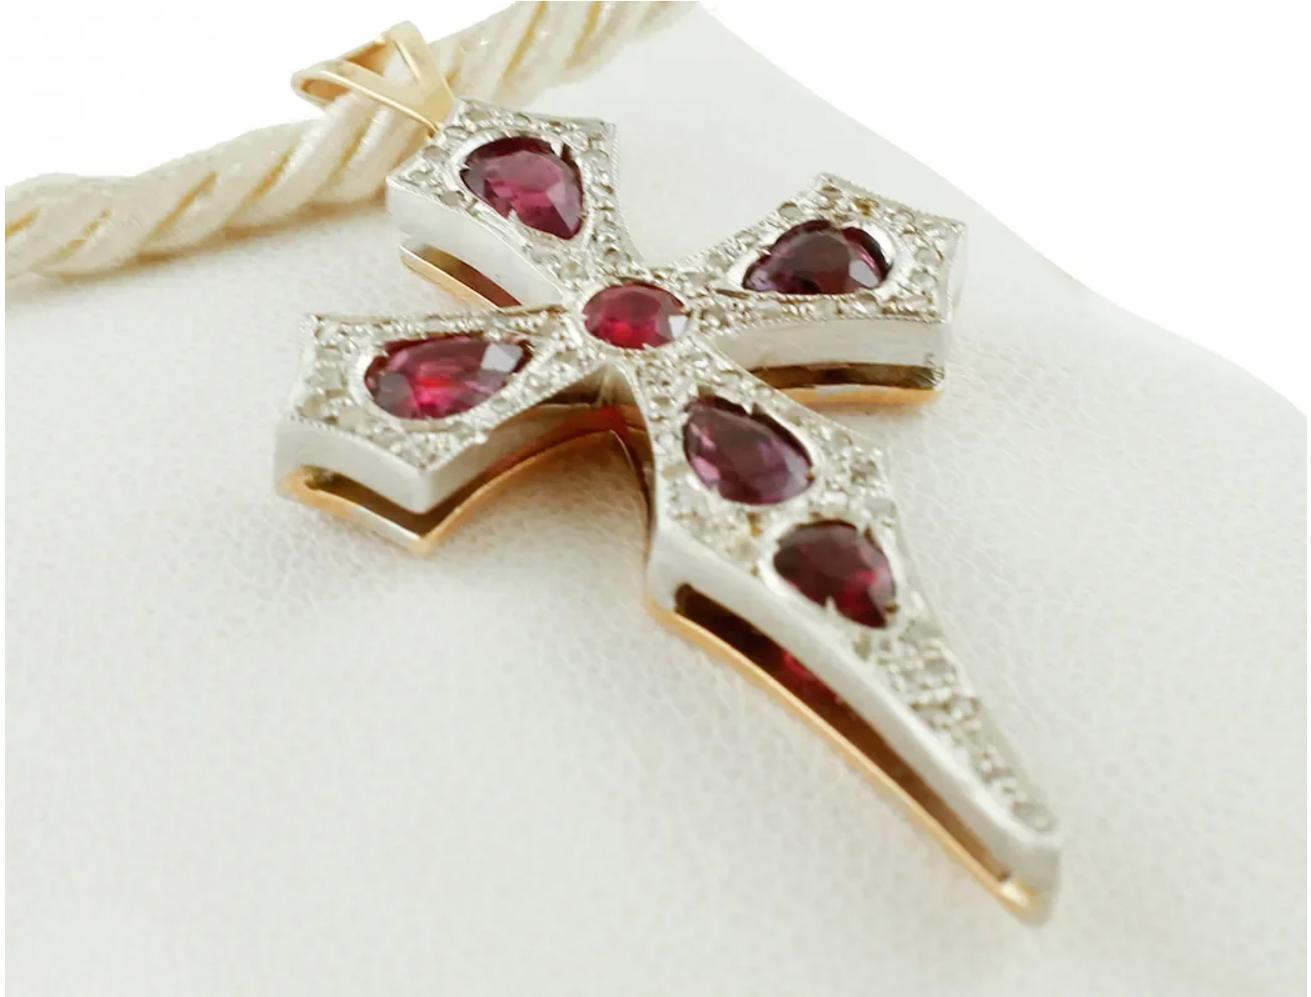 Vintage cross pendant in 9 kt rose gold and silver structure studded with diamonds and intense rubies.
The origin of this pendant goes back to the 1970s, it was totally handmade by Italian master goldsmiths and it is in perfect condition.
Diamonds